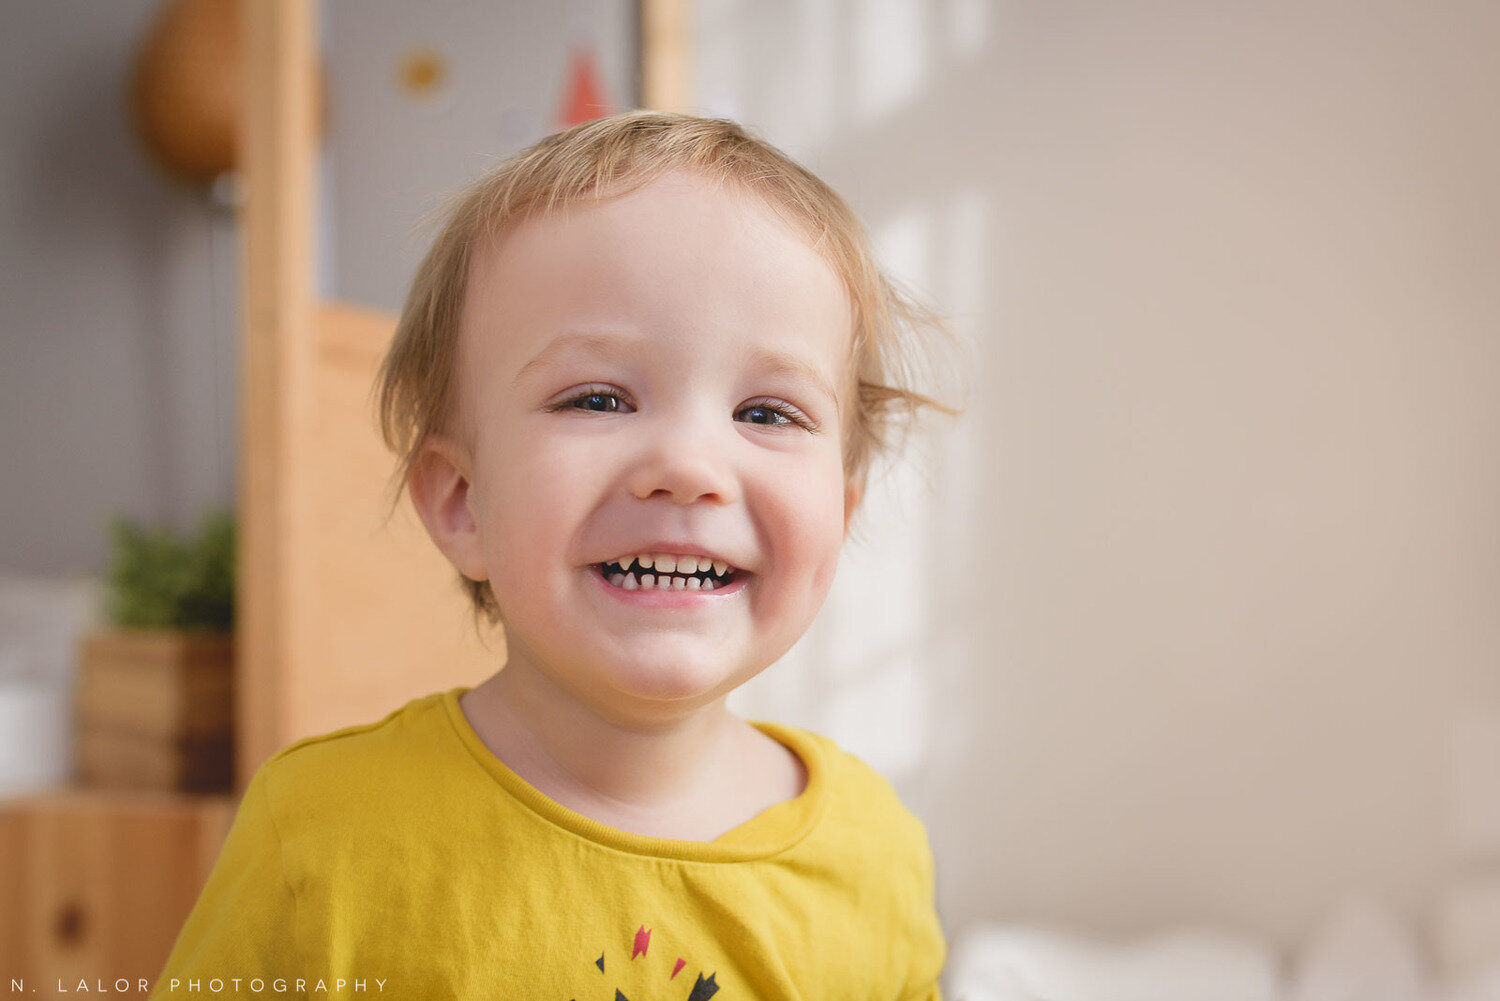 nlalor-photography-2016-yellow-room-with-toddler-at-home-5.jpg